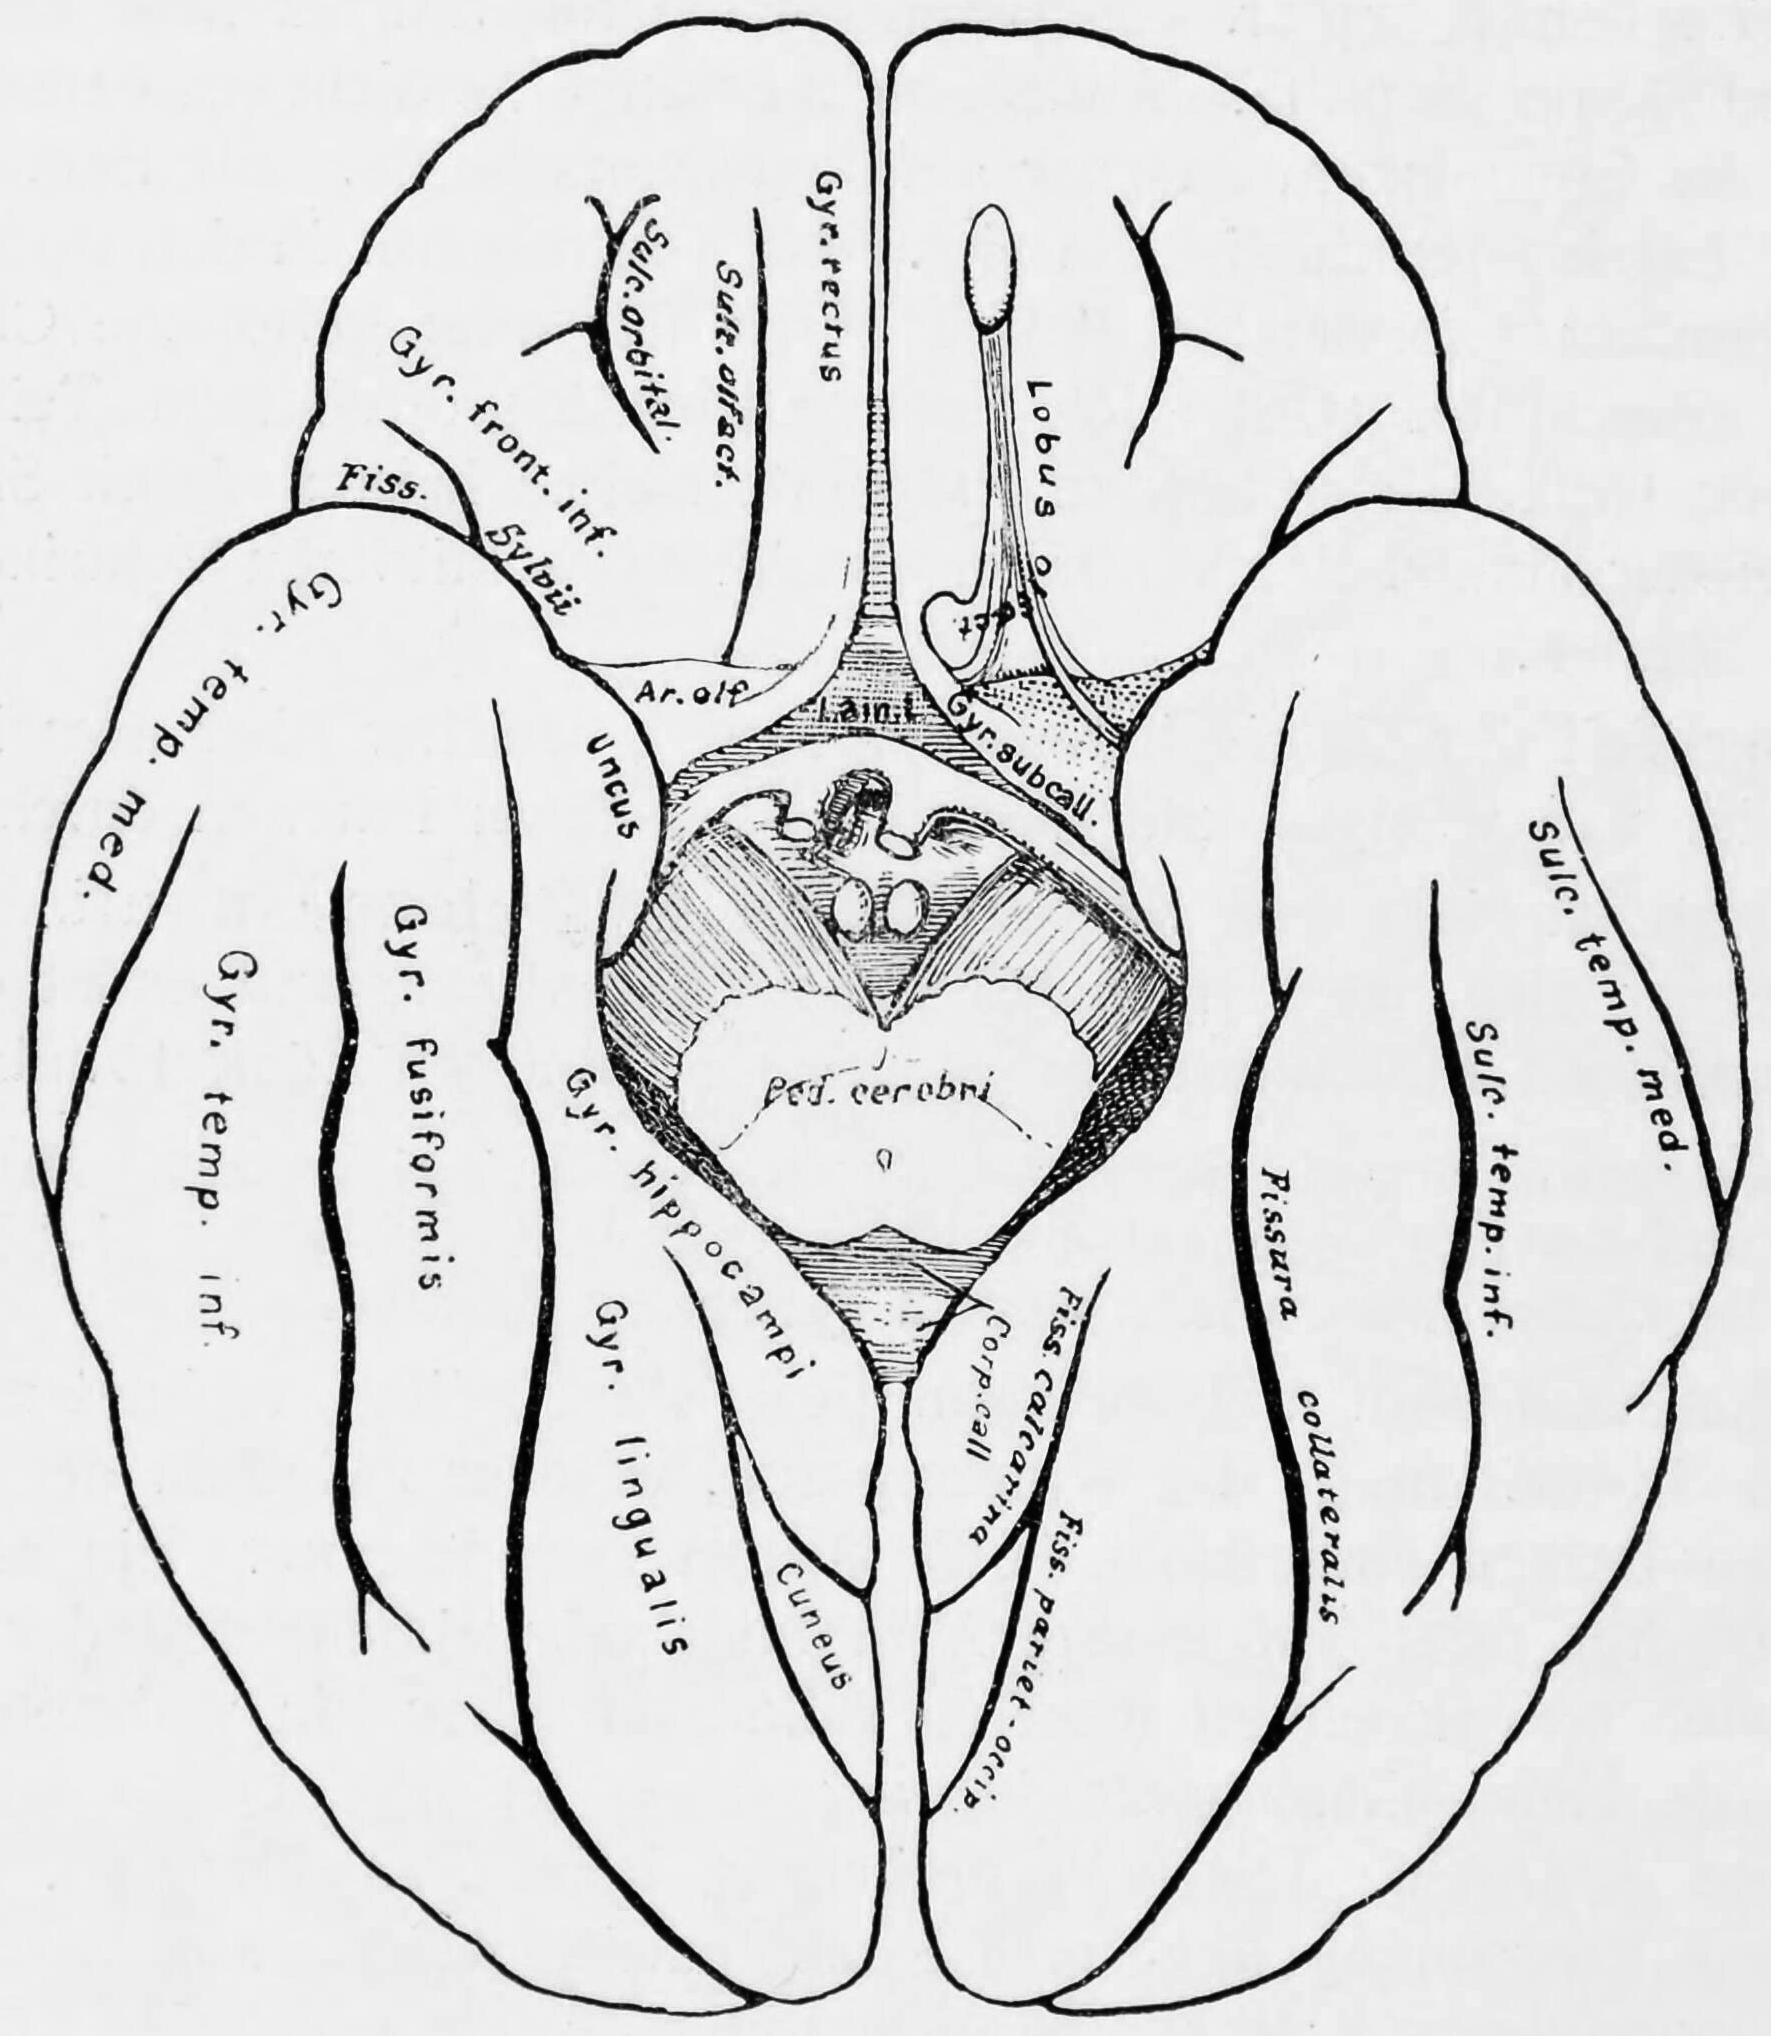 Diagram showing a view from the bottom of the ridges (gyri) and grooves (sulci) of the left hemisphere of the brain.